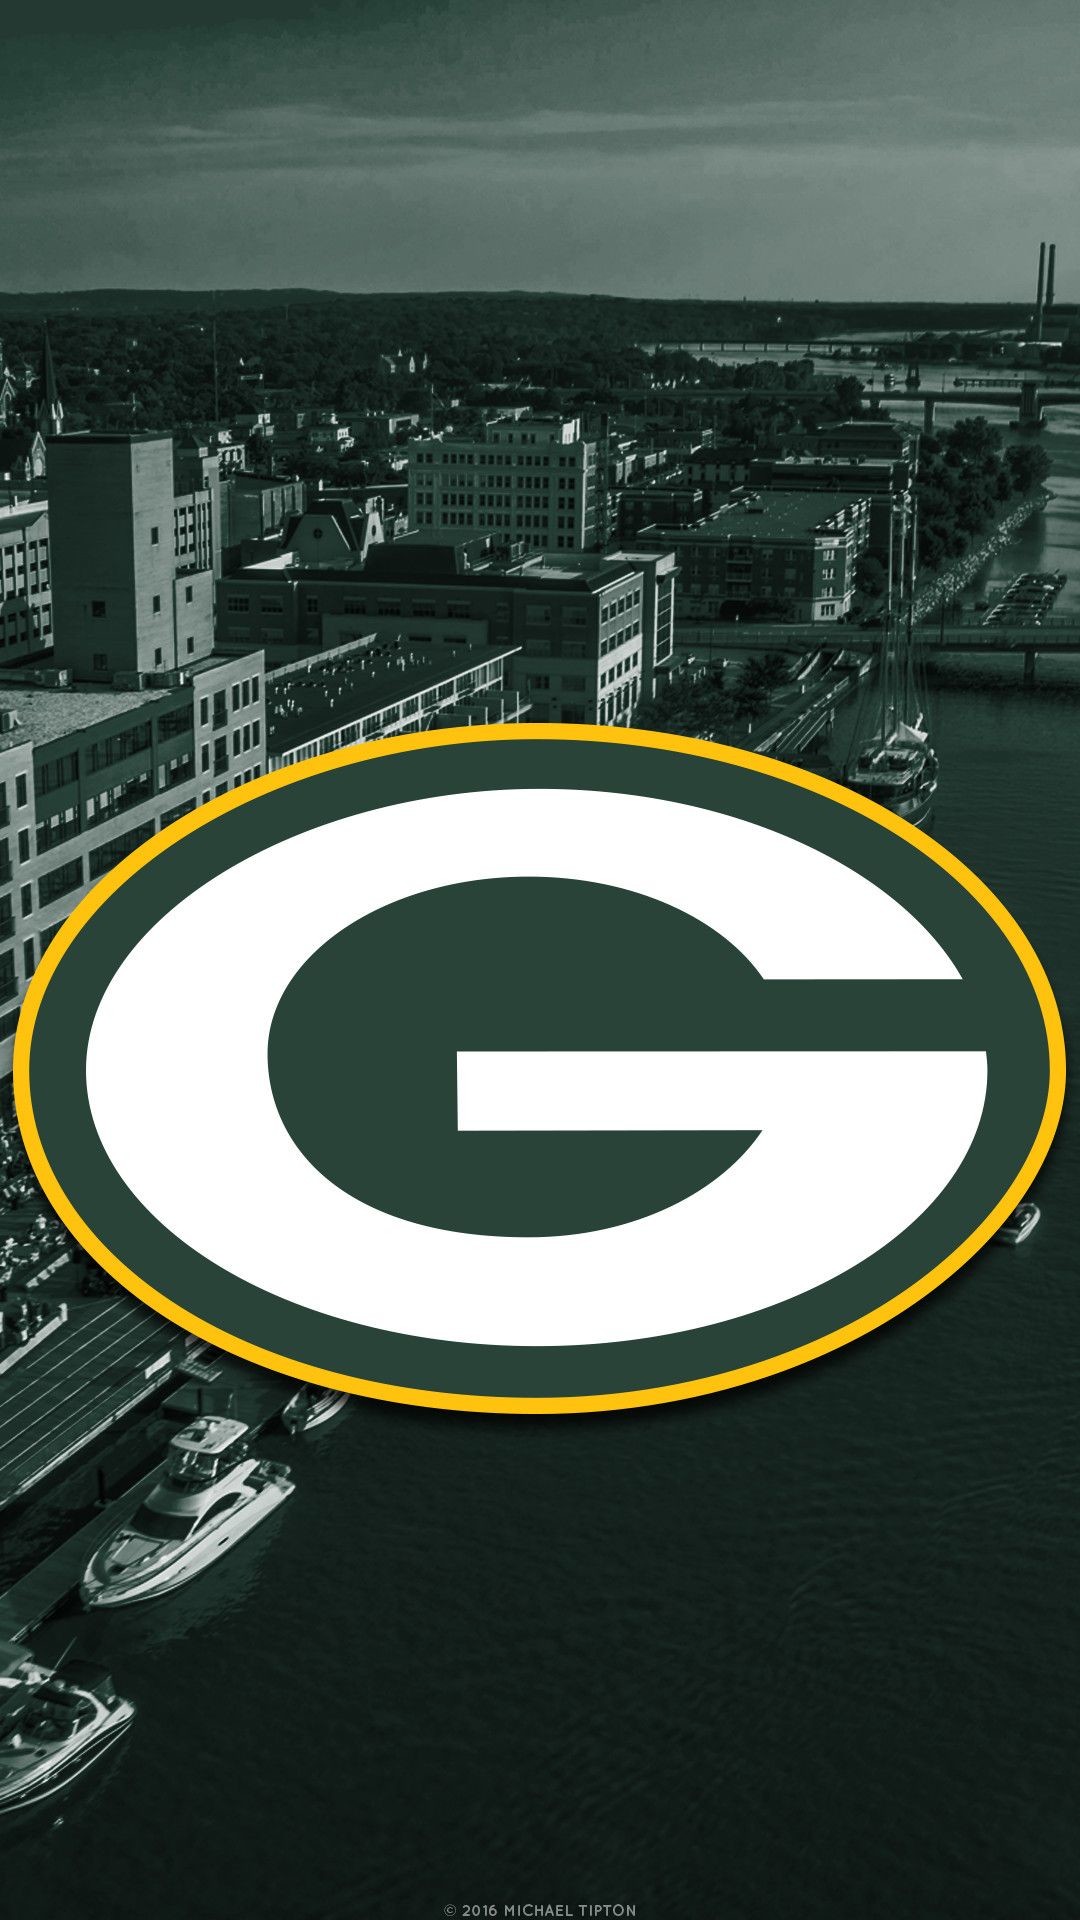 1080x1920 Packers 2018 Schedule Wallpaper (70+ images)